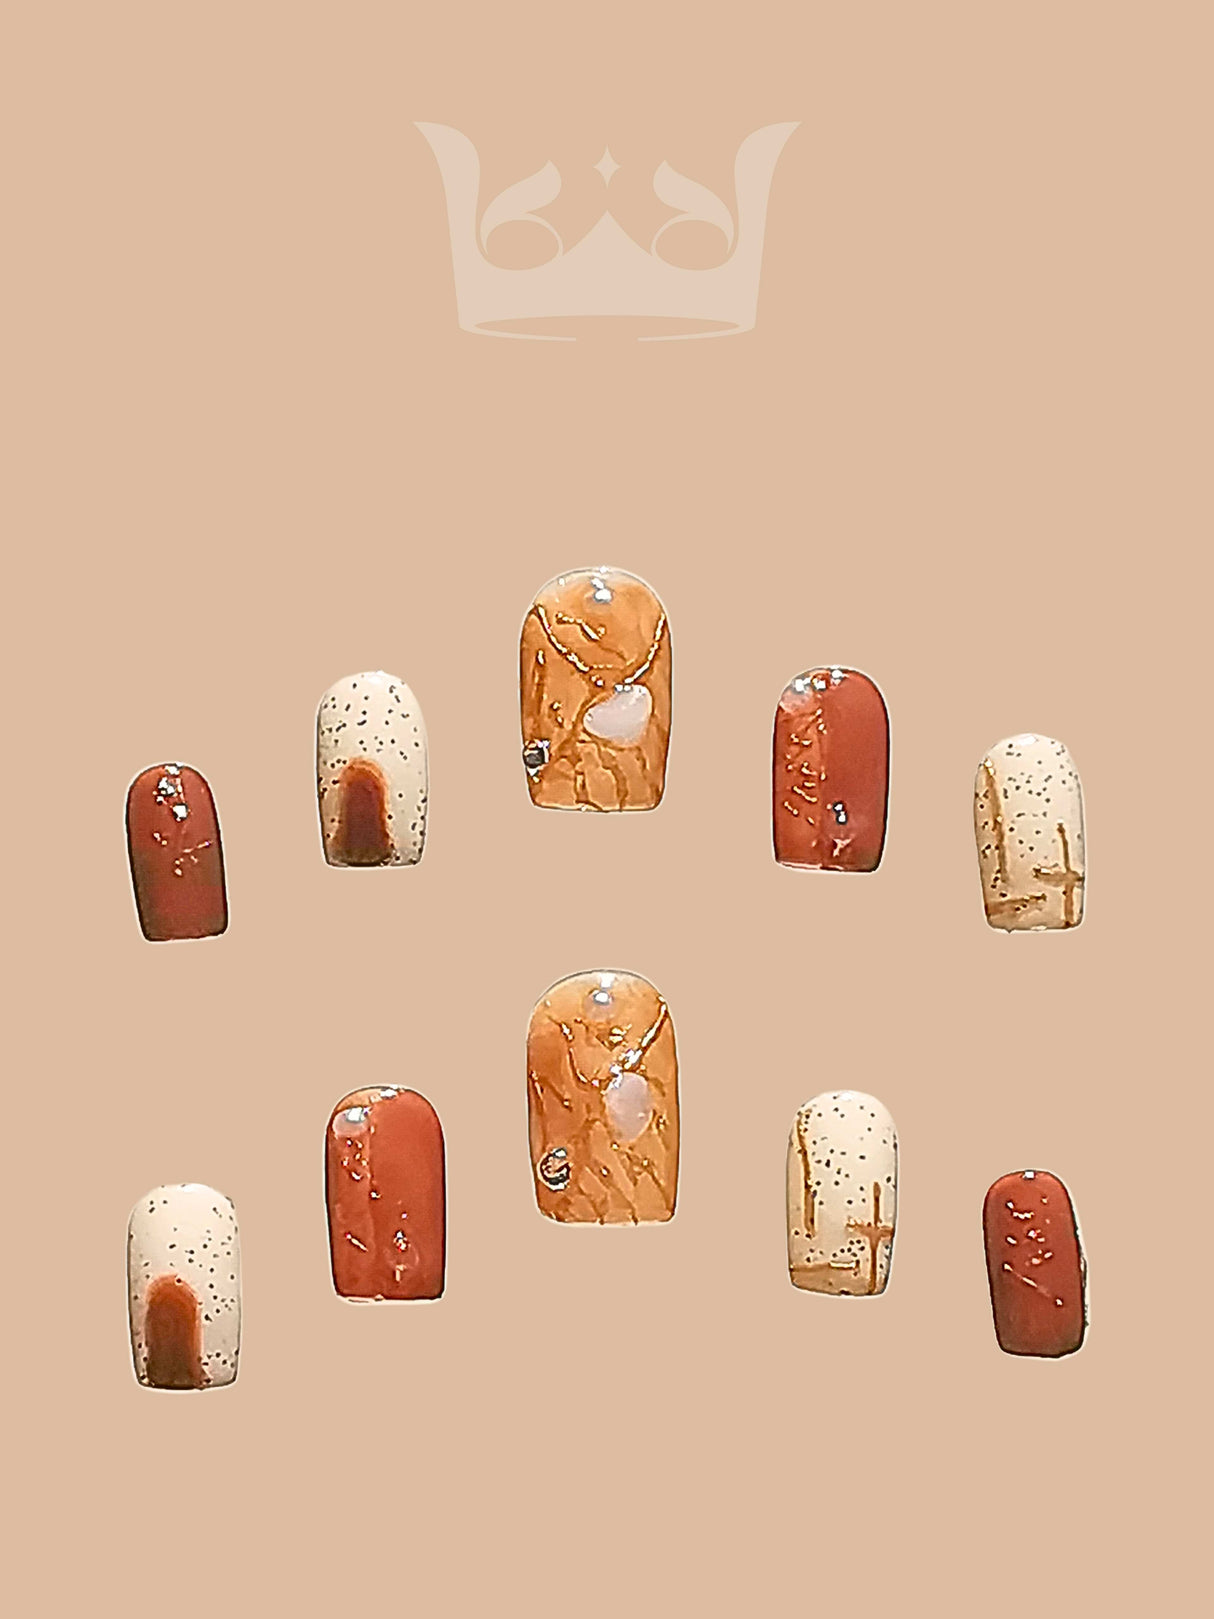 These cute nails are for nail art design, with natural and earthy themes. They have solid colors and speckled patterns, appealing to trendy and fashionable individuals.